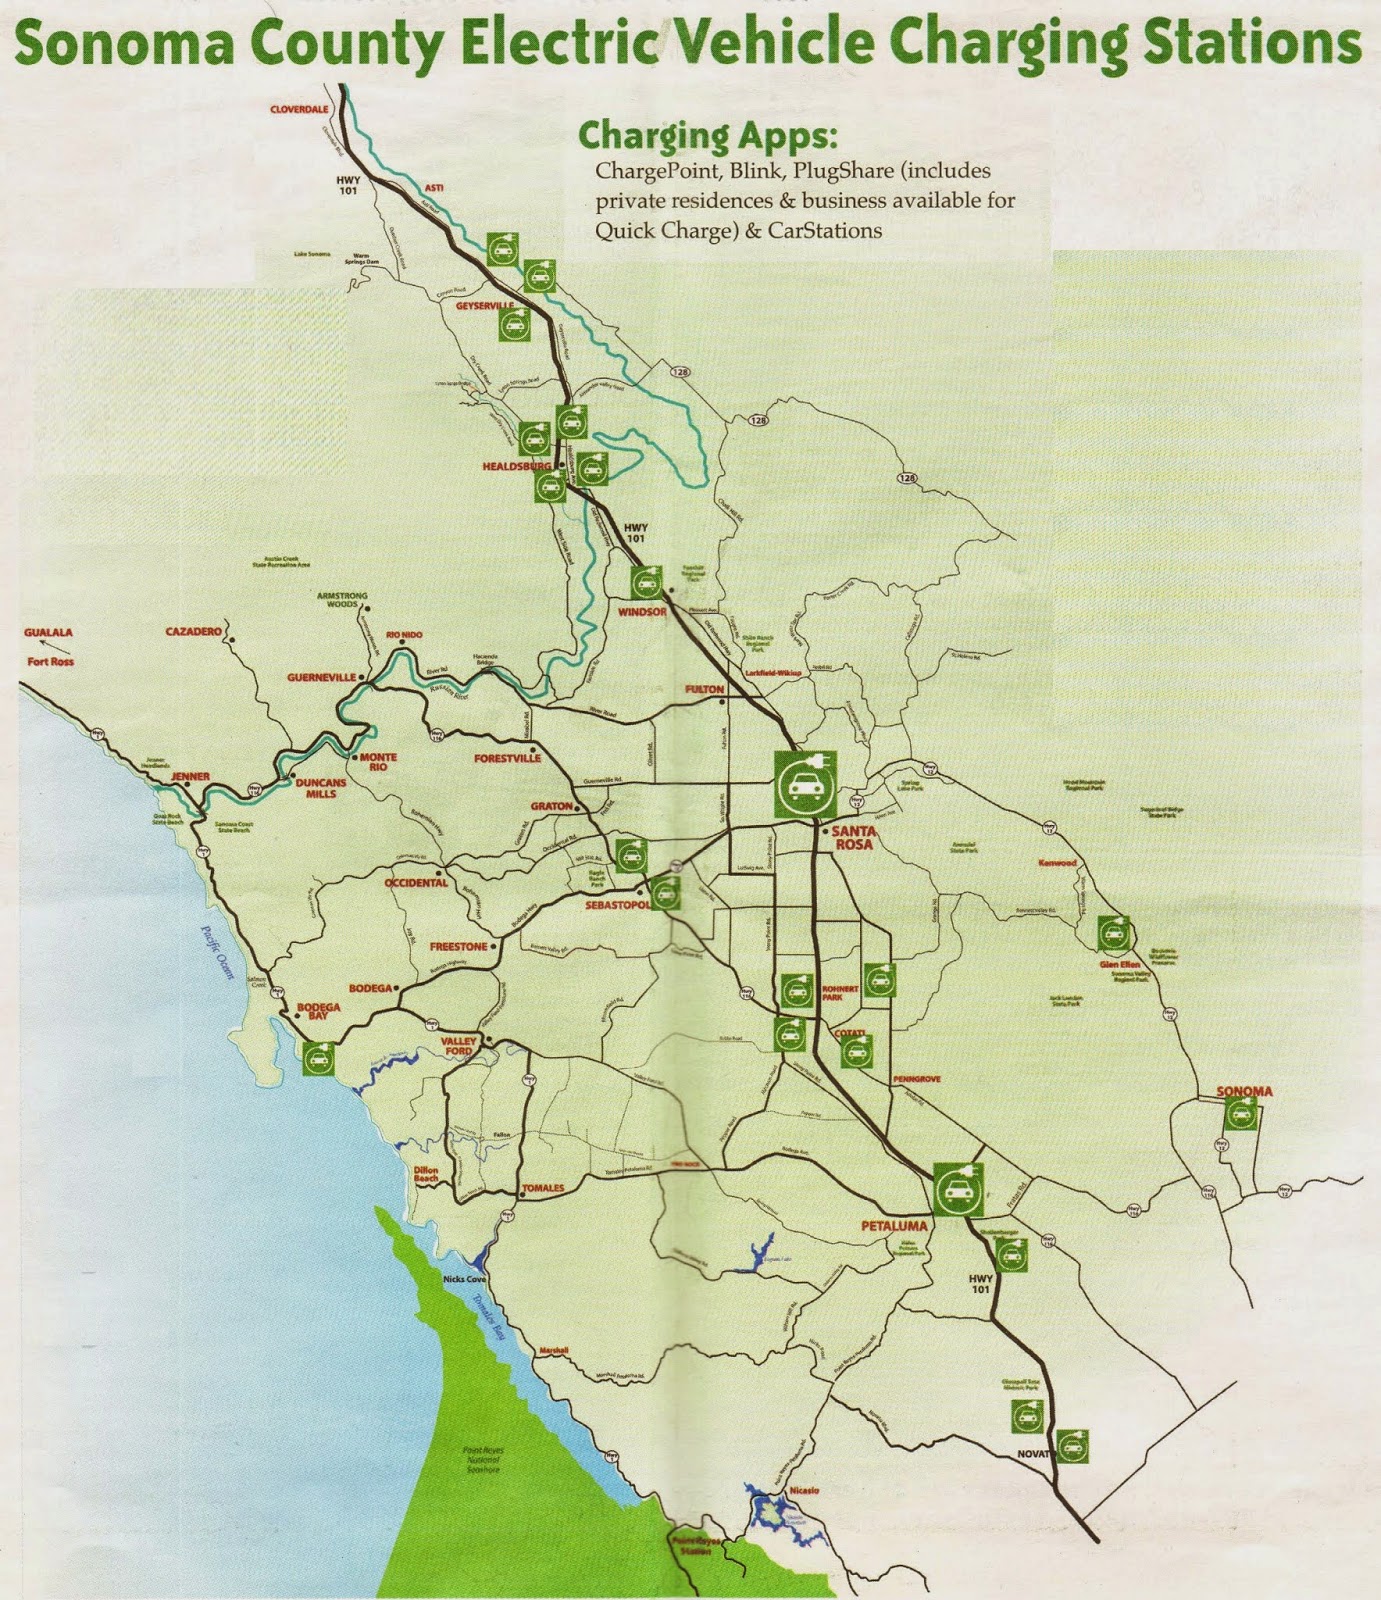 san-pablo-bay-sovereignty-sonoma-county-electric-vehicle-charging-stations